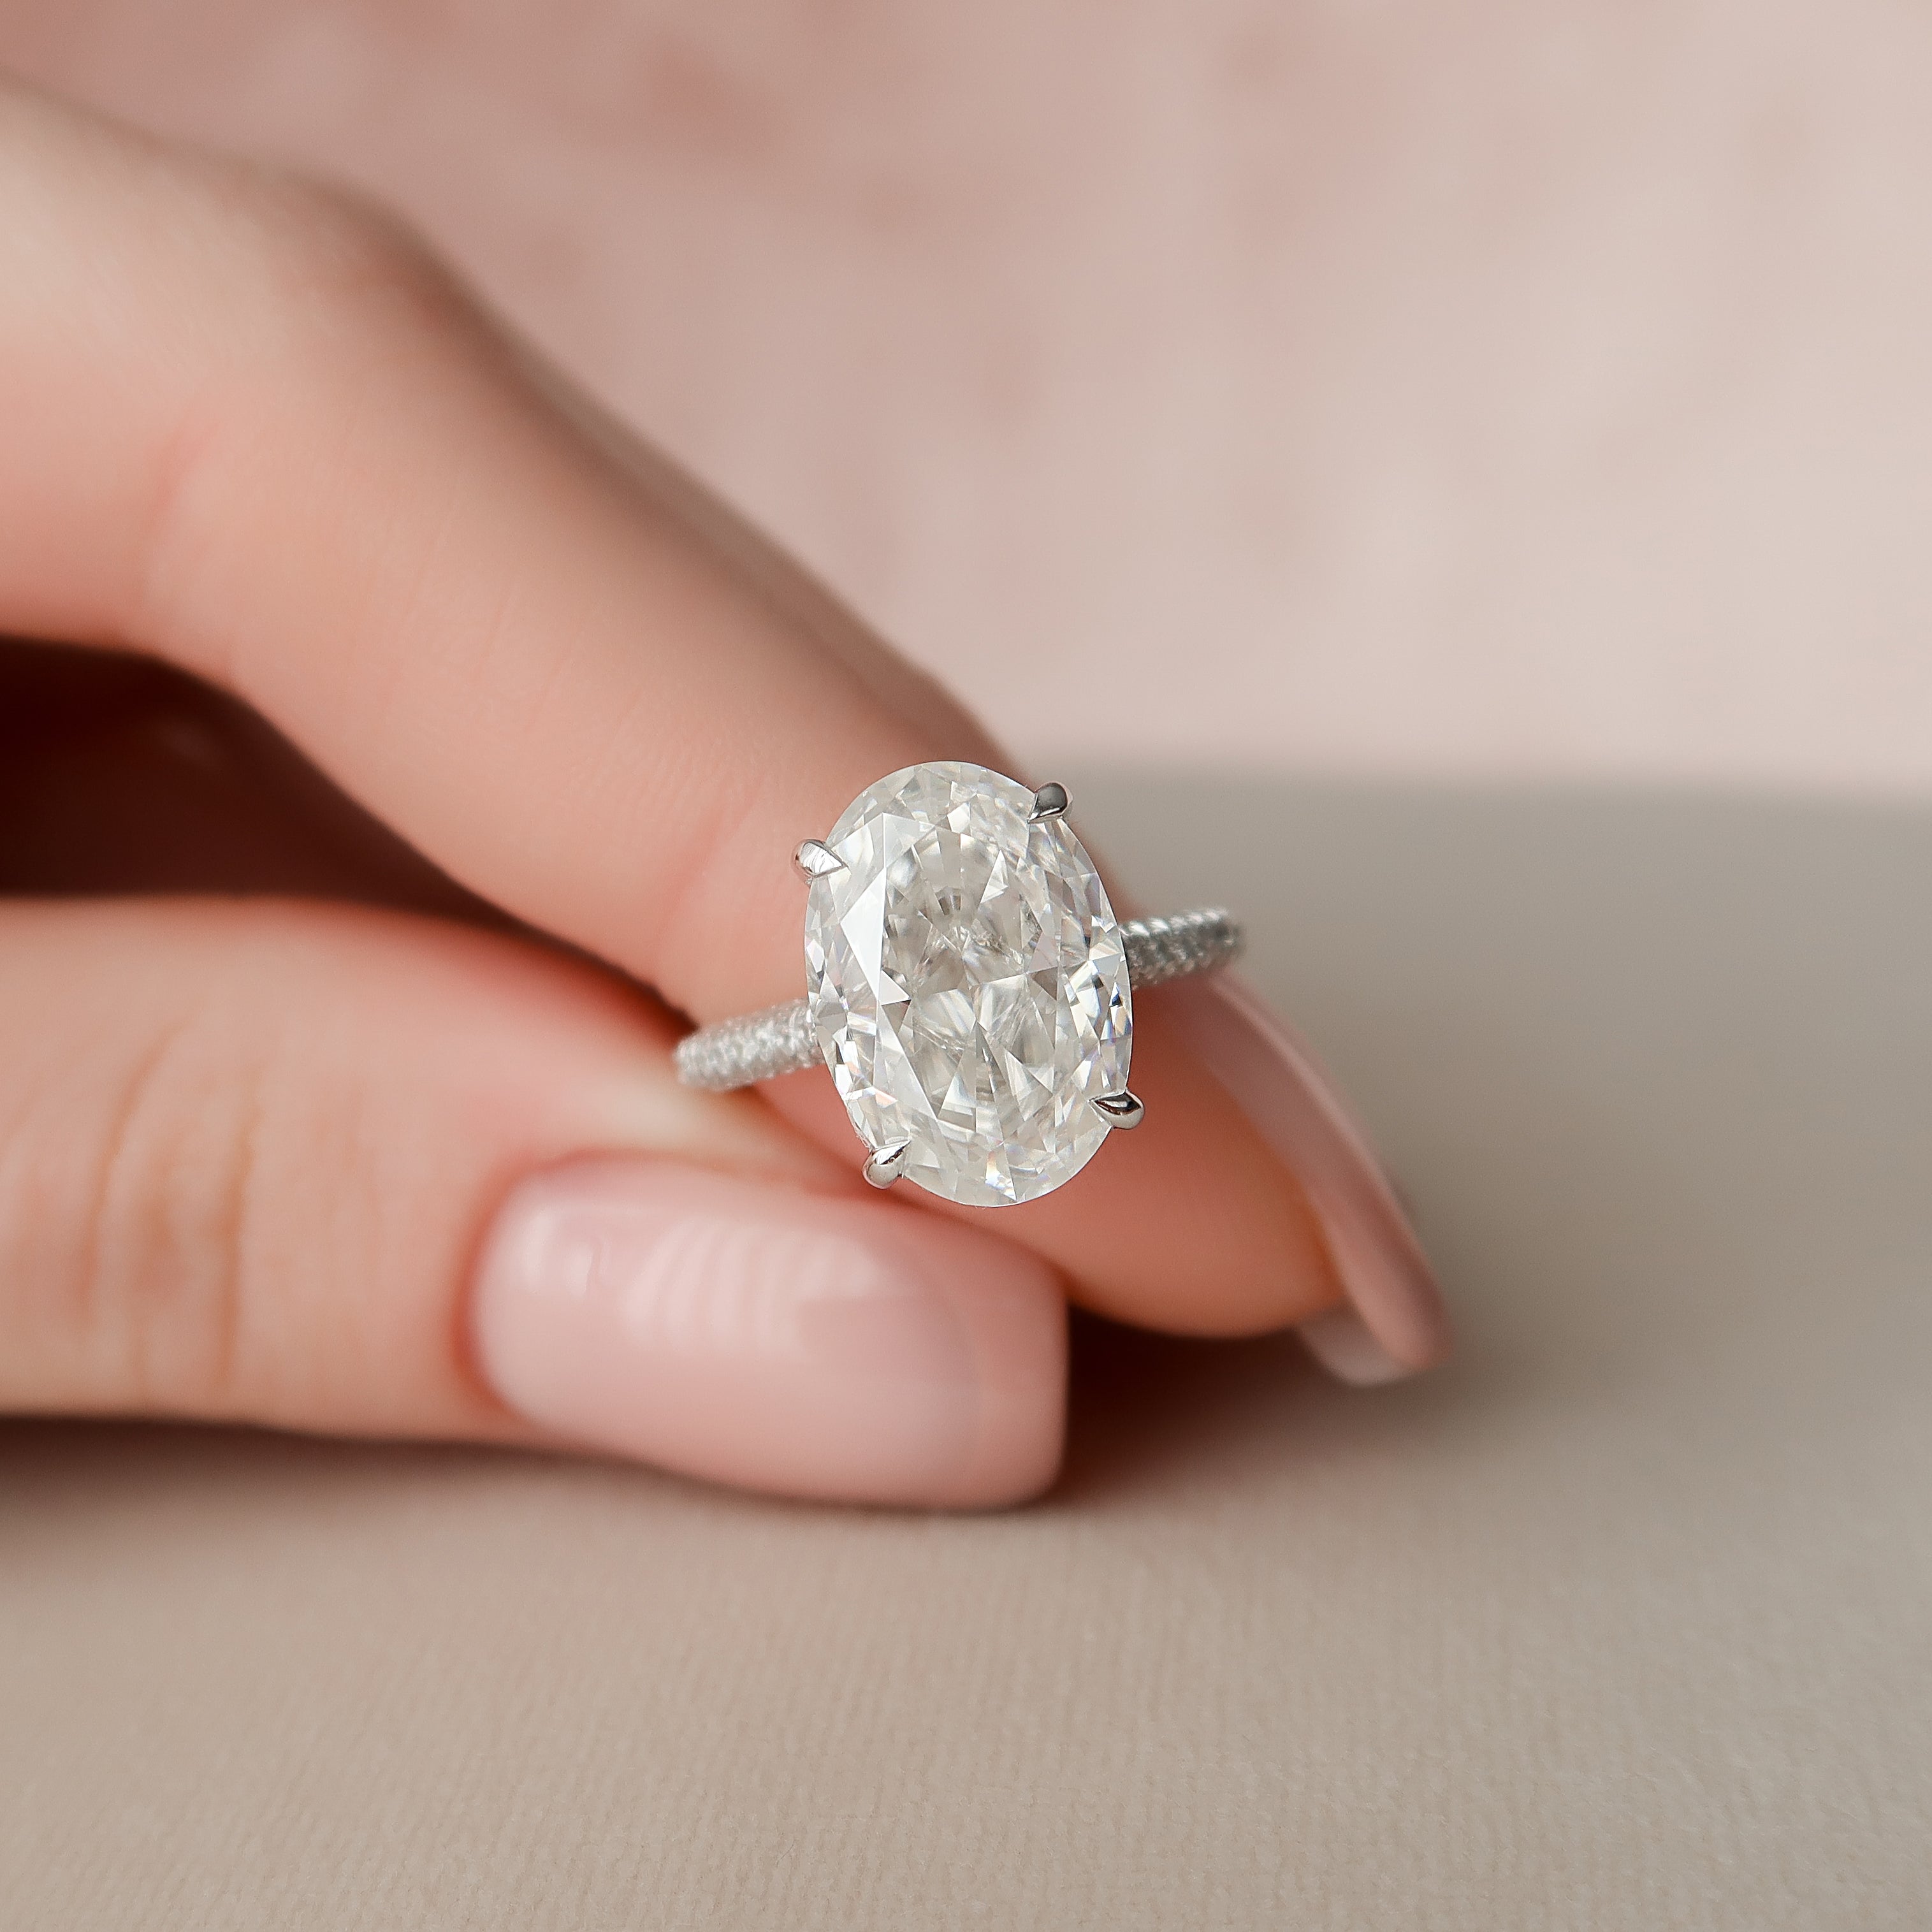 4 Reasons Not to Buy an Oval Moissanite Engagement Ring